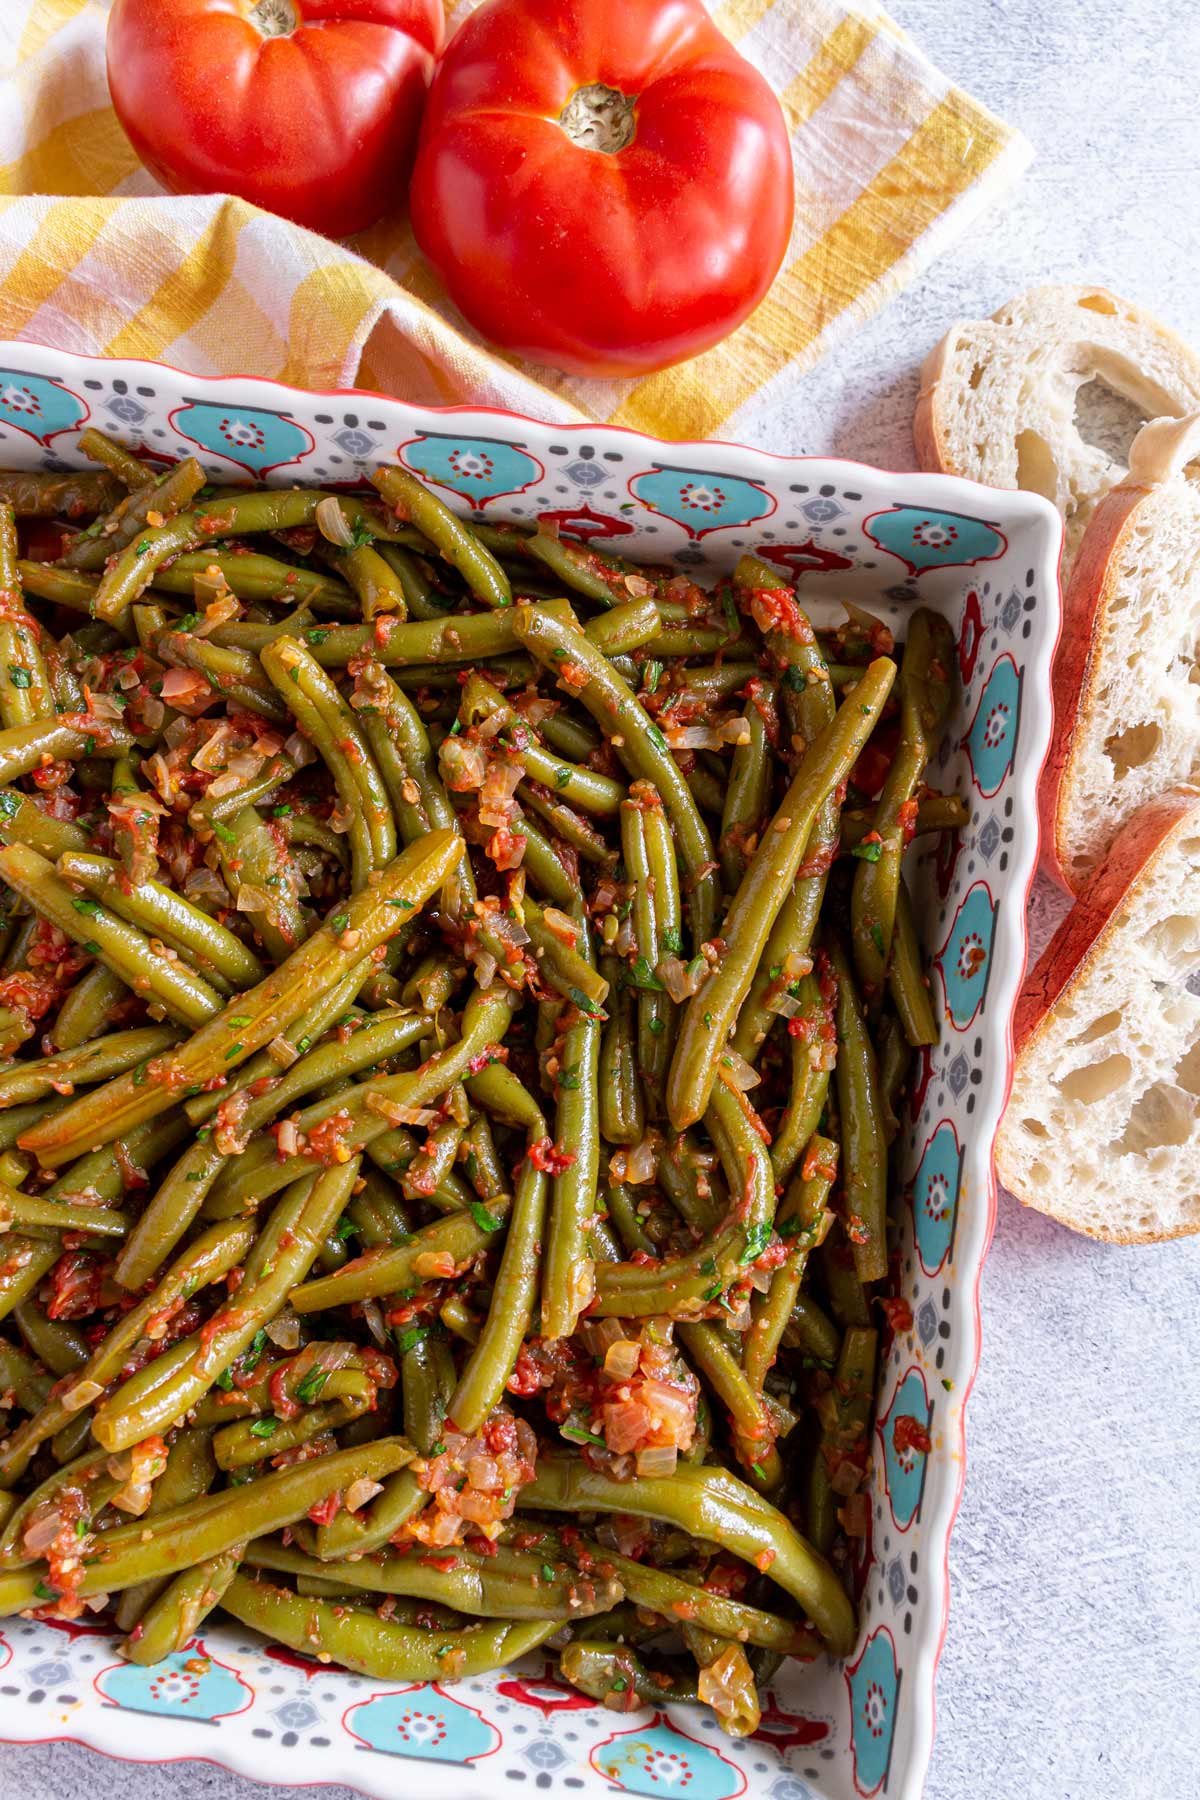 Greek stewed green beans in a square dish with sliced bread and tomatoes next to it.